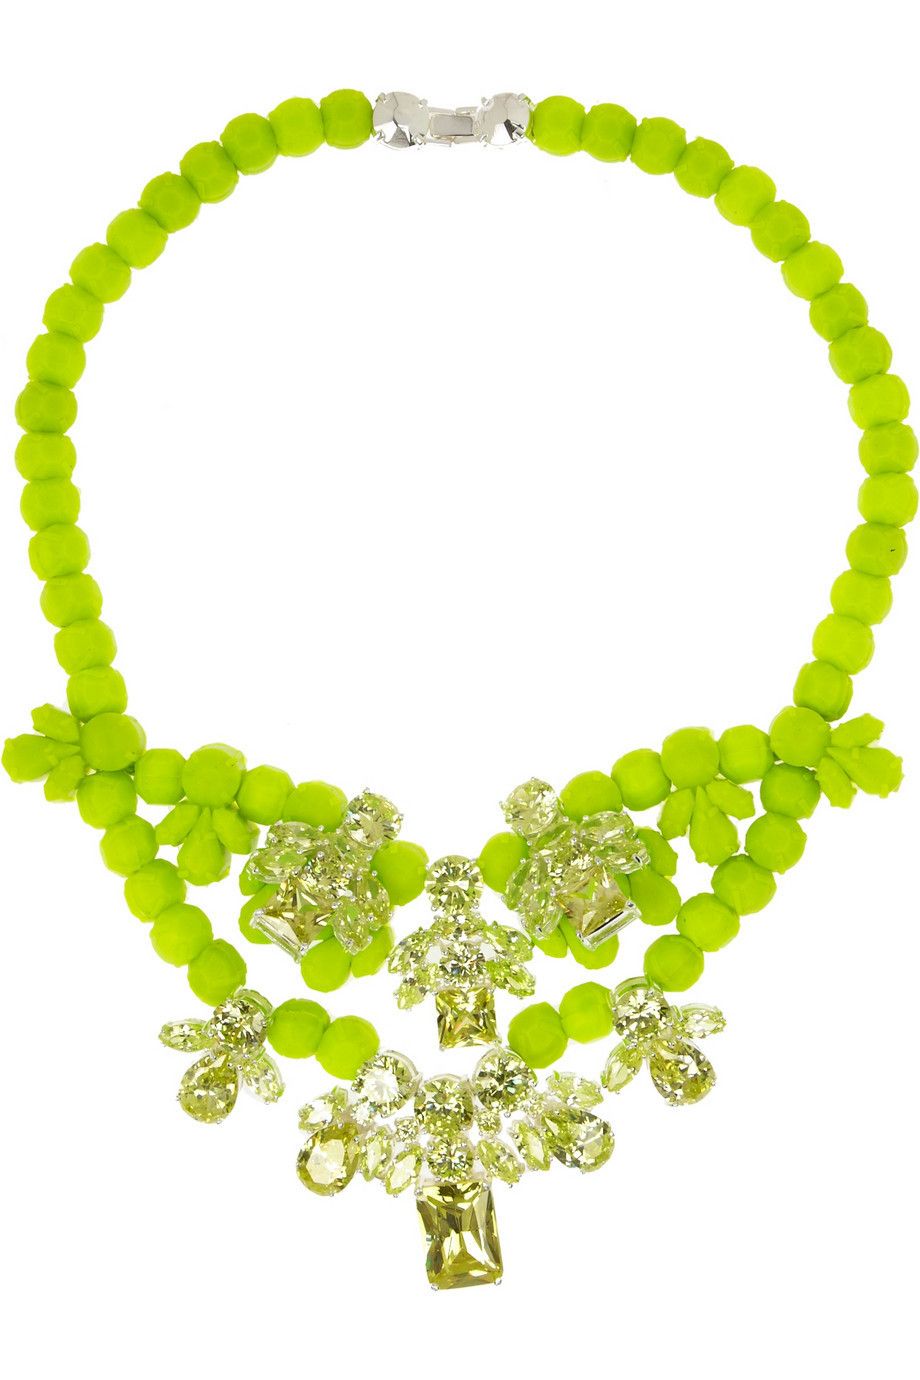 Green, Jewellery, Leaf, Necklace, Body jewelry, Natural material, Creative arts, Craft, Circle, Jewelry making, 